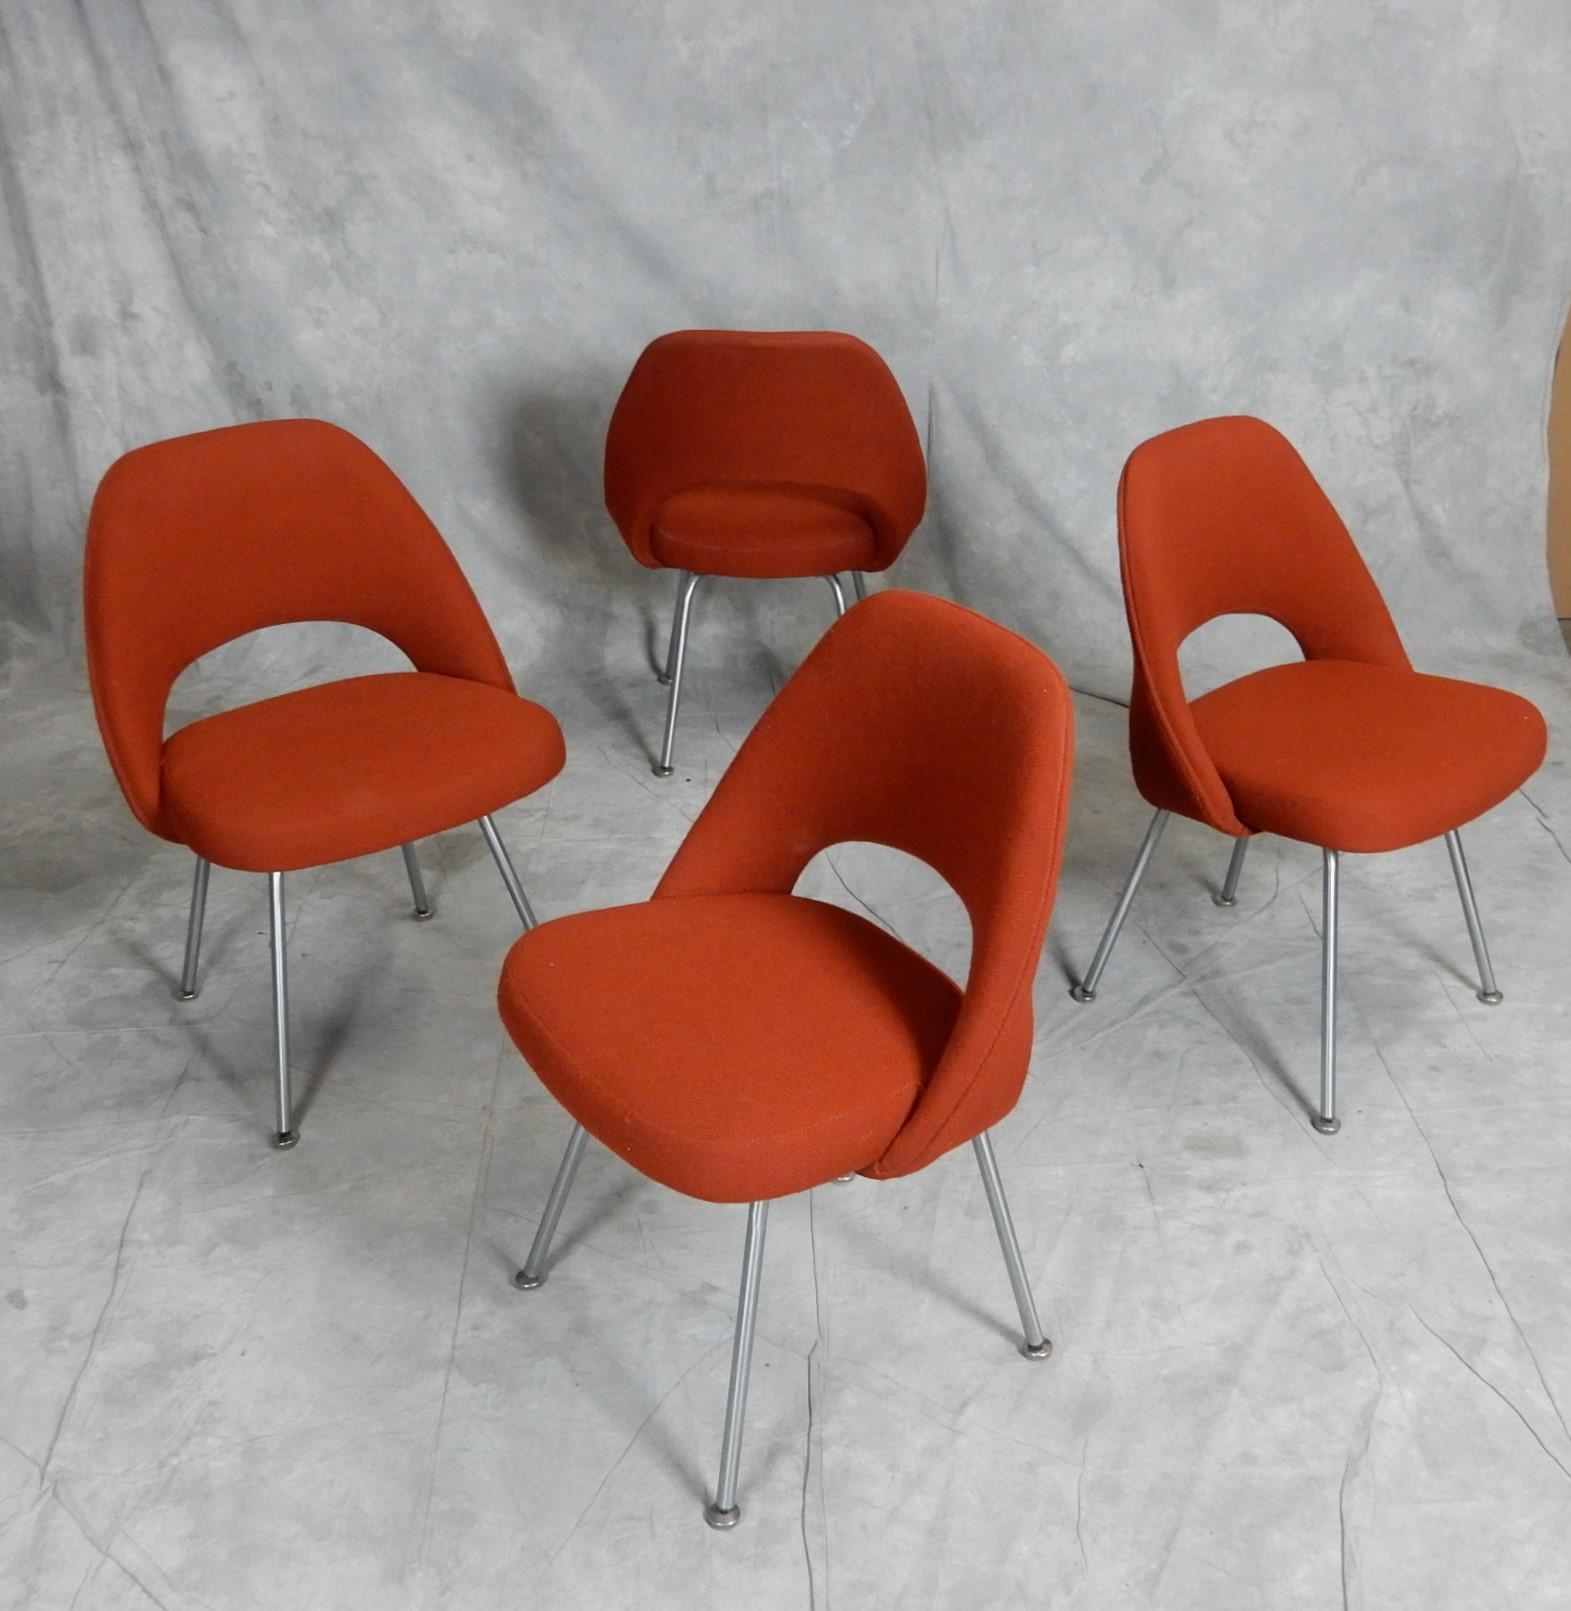 Mid-Century Modern Mid-Century Saarinen for Knoll Executive Armless Chairs. set of 4, dated 1963 For Sale